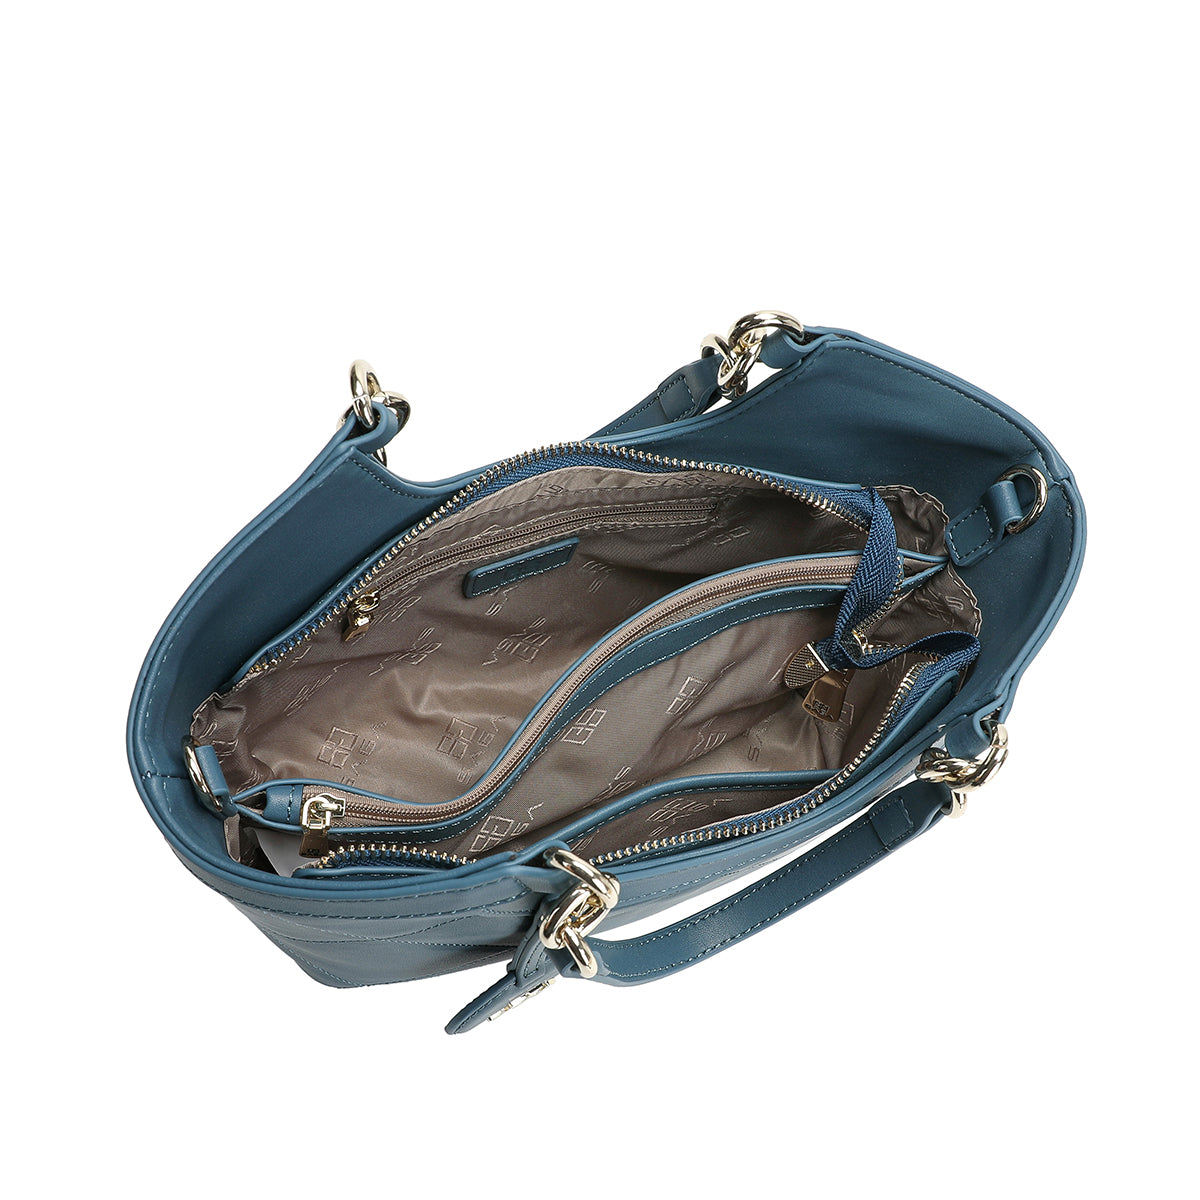 Luxury leather bag with a distinctive handle and light size, blue colour